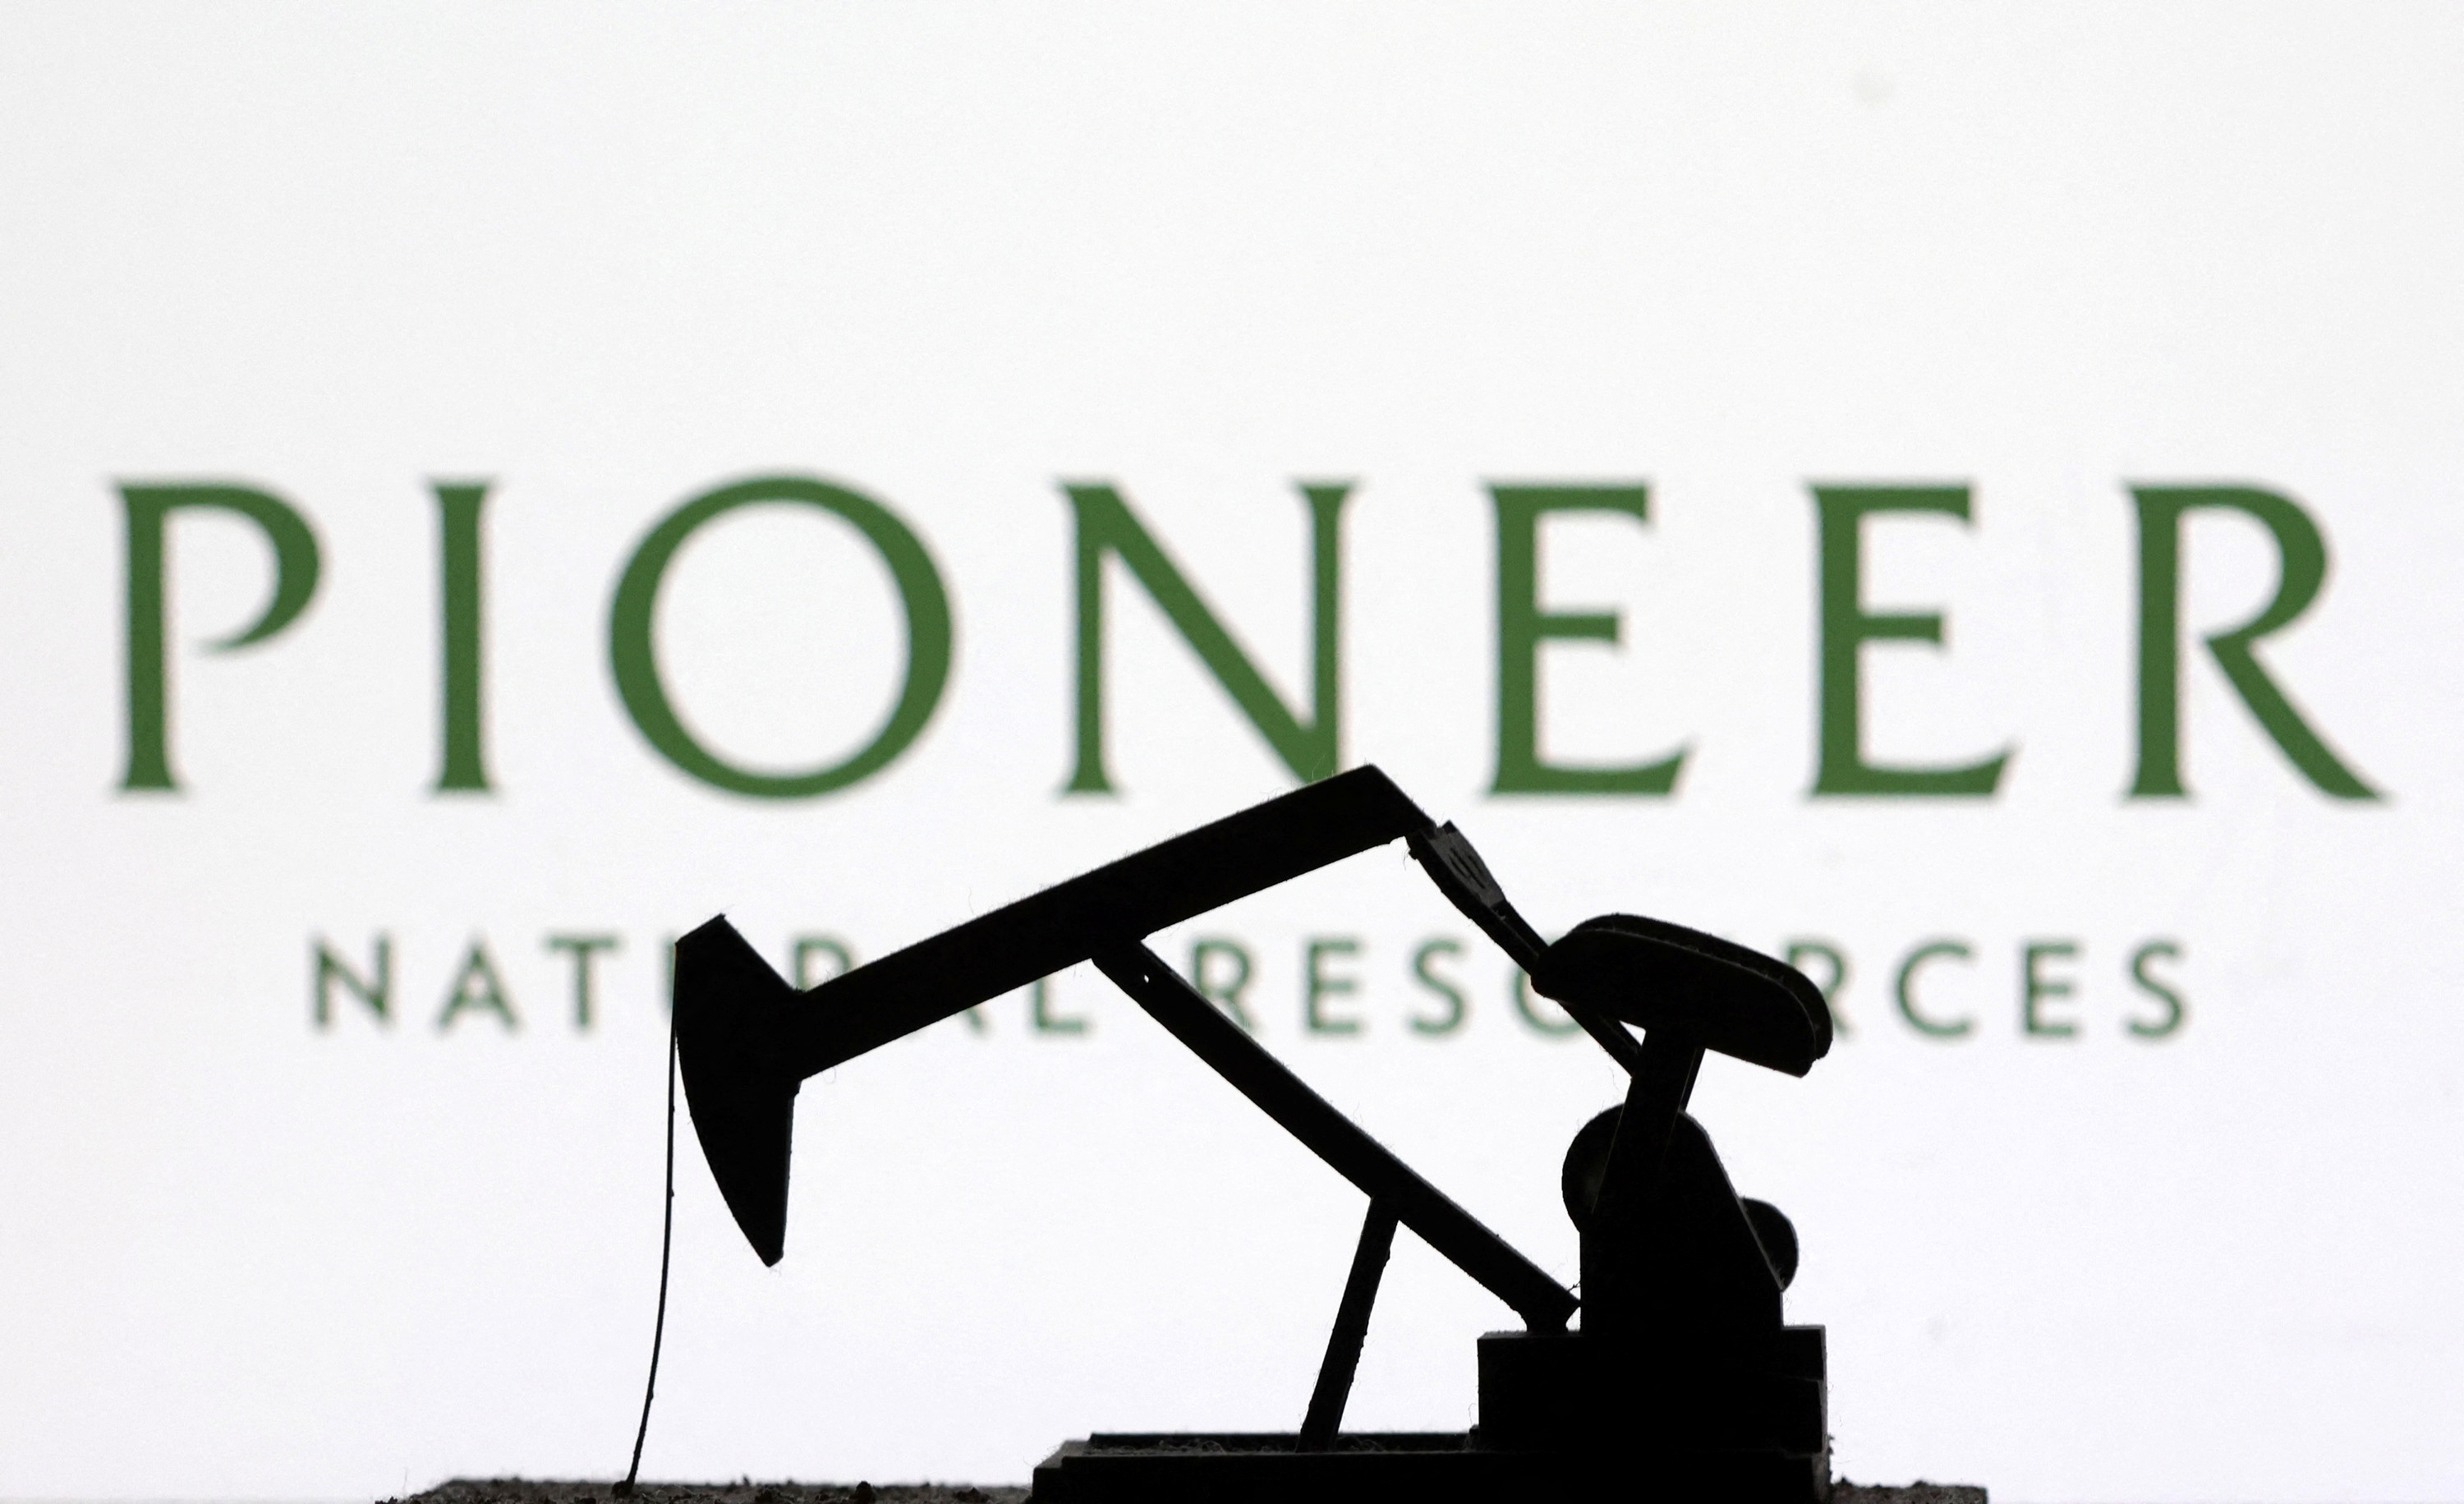 Illustration shows Pioneer Natural Resources logo